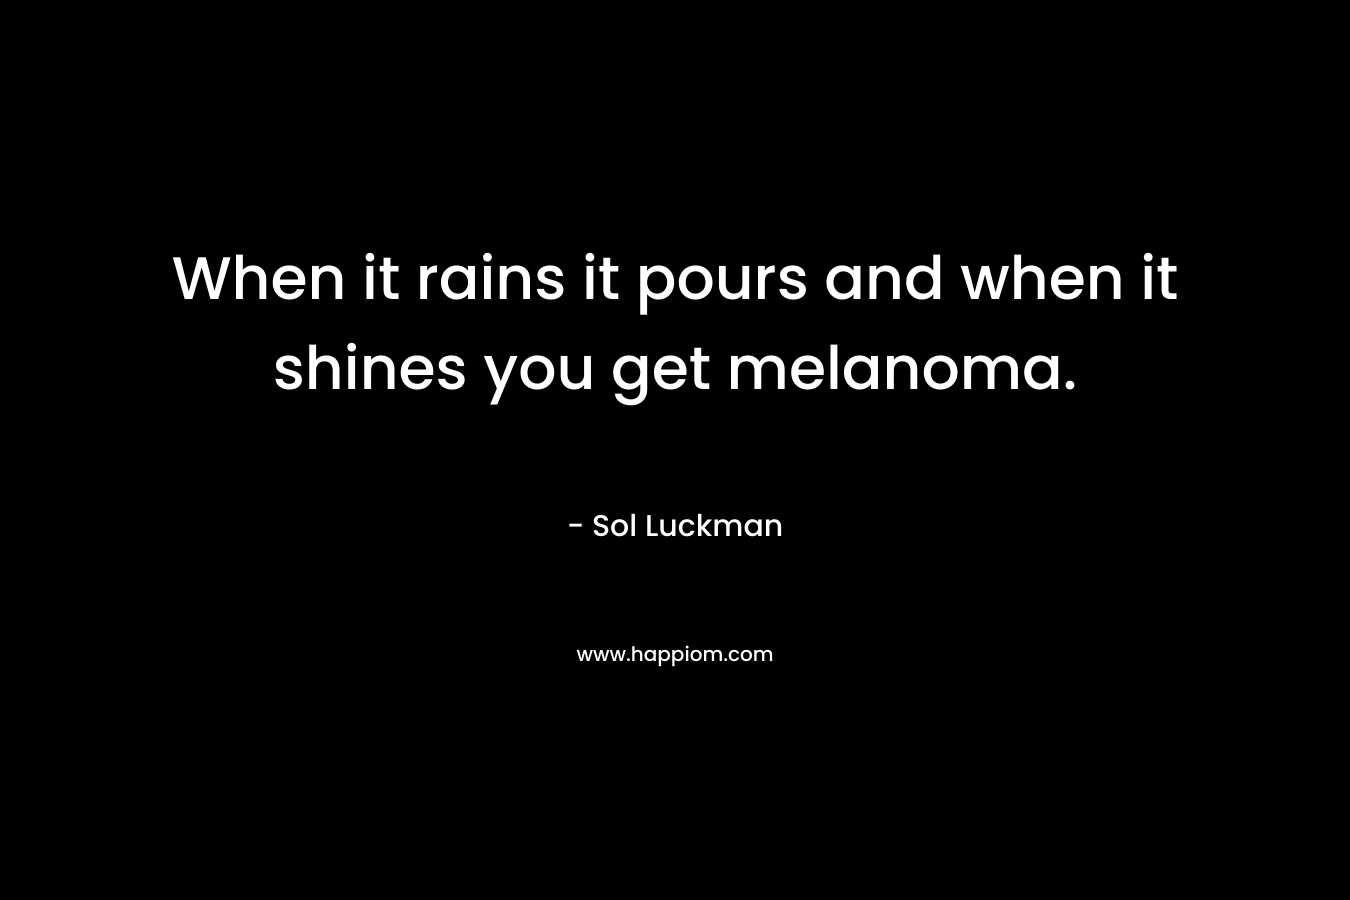 When it rains it pours and when it shines you get melanoma. – Sol Luckman